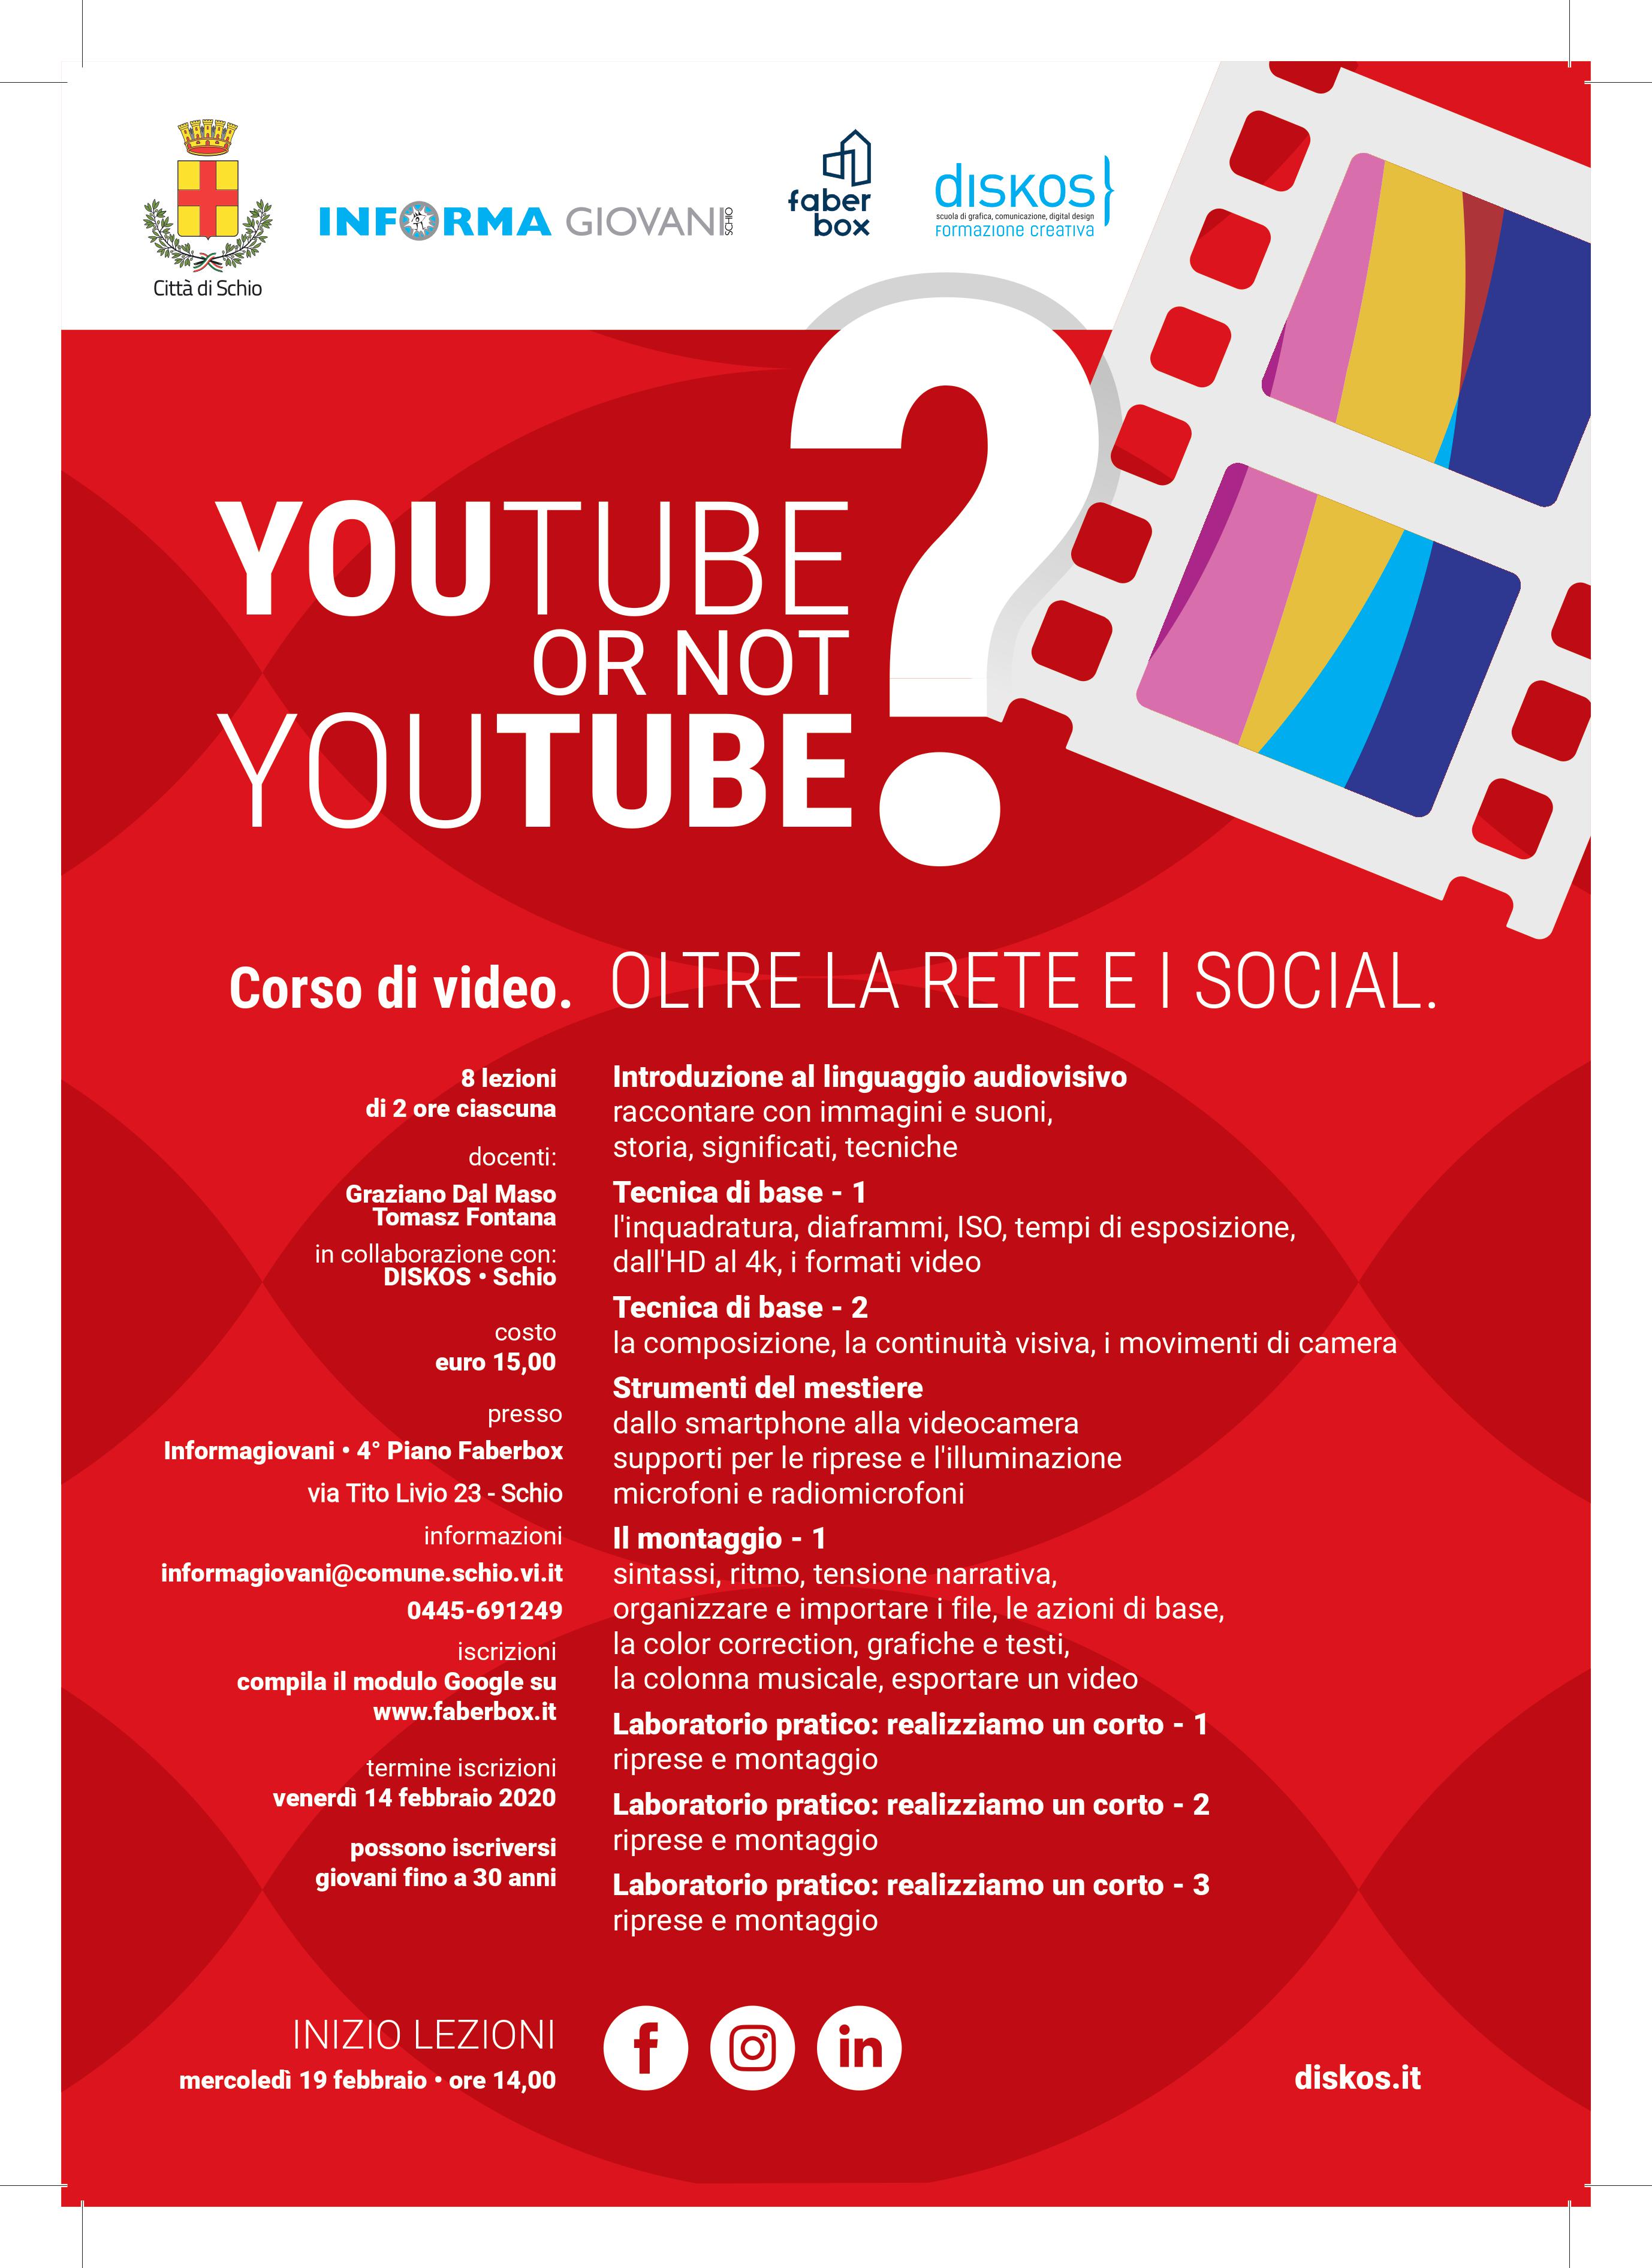 YOUTUBE OR NOT YOUTUBE